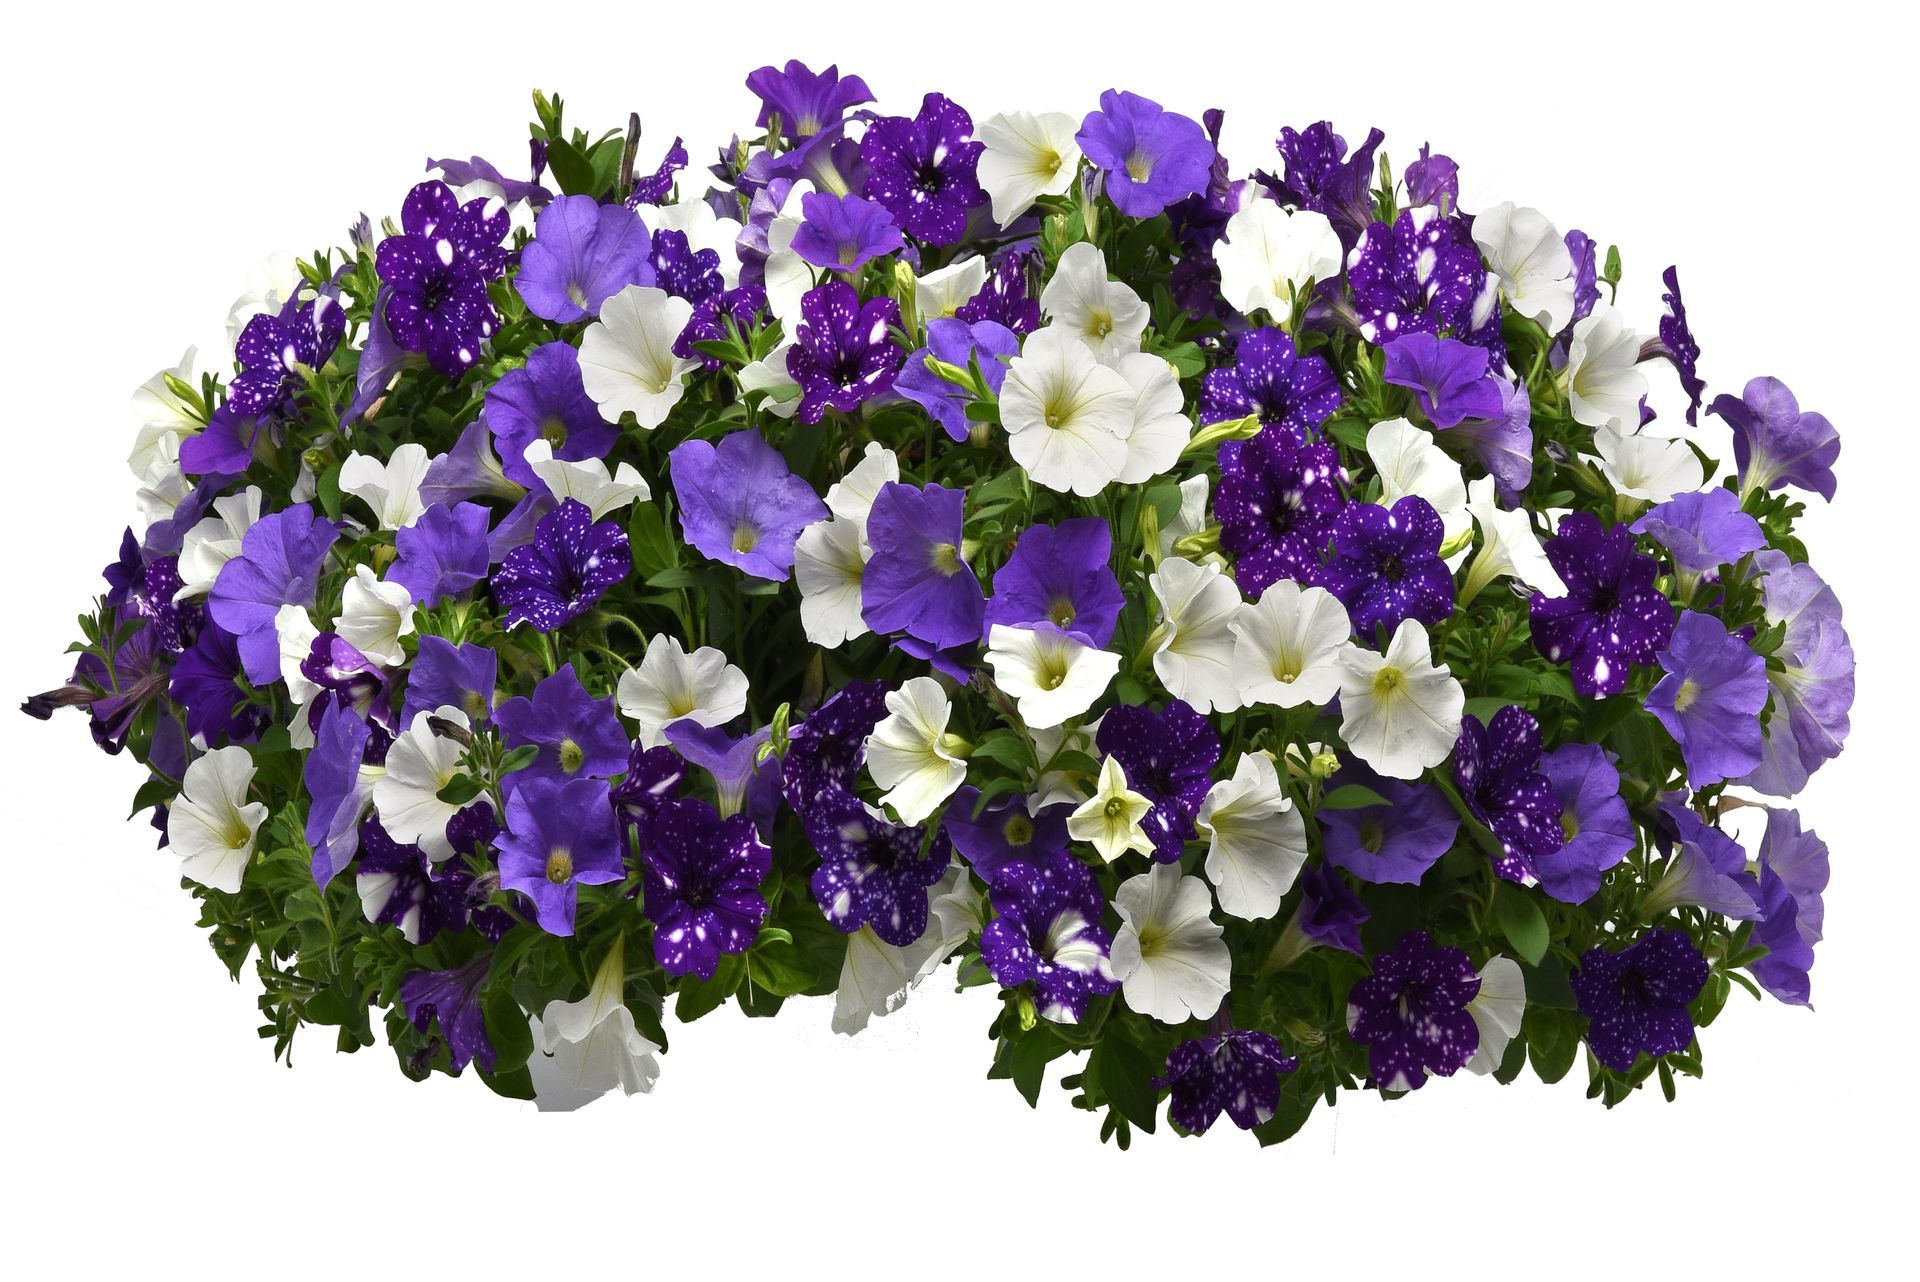 Petunia Mix Hanging Basket Flowers for sale in Lebanon PA